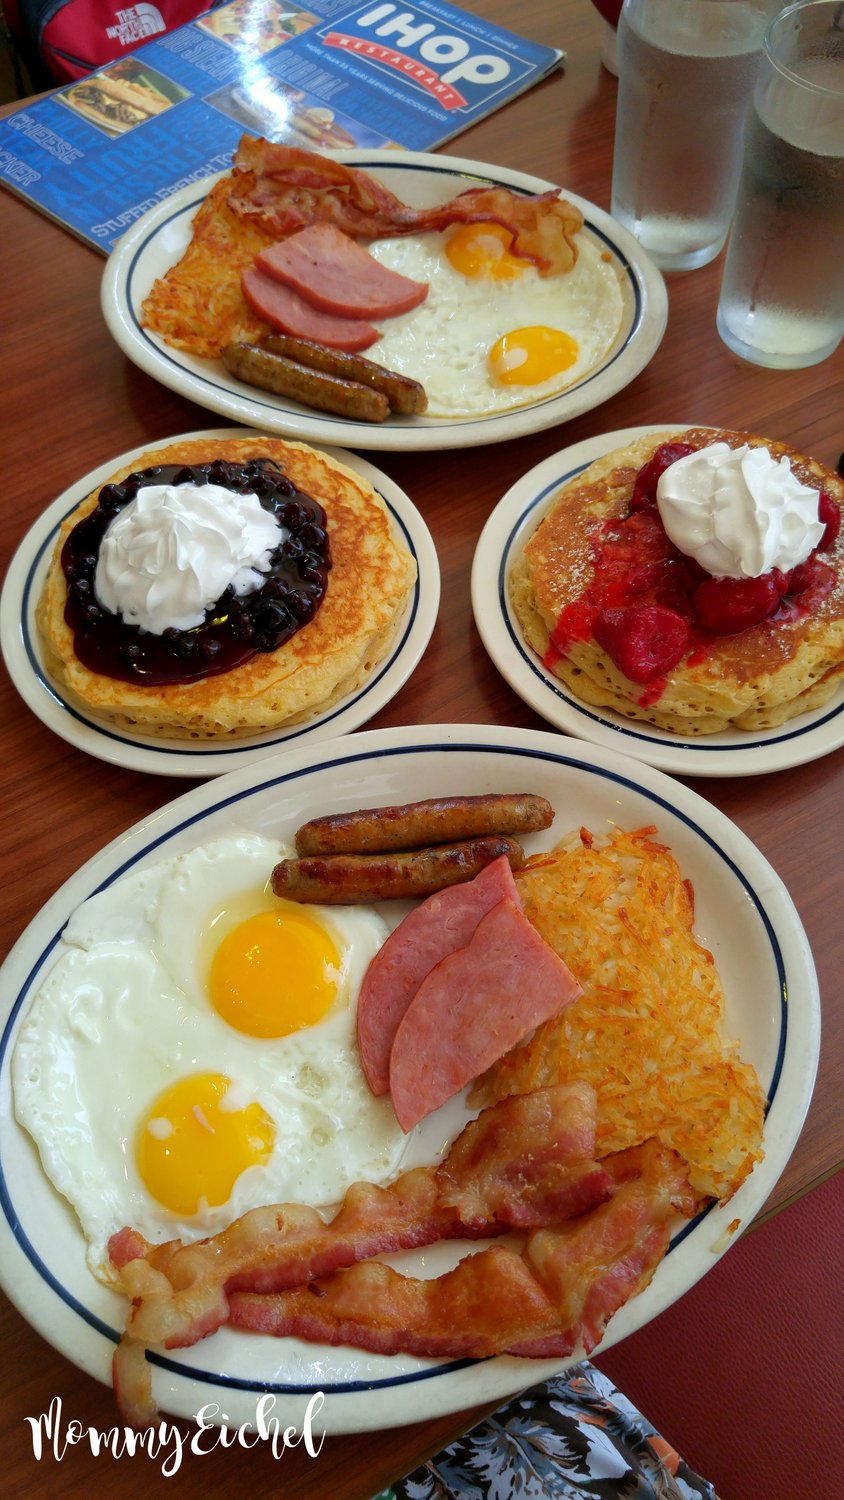 Family Day Breakfast at IHOP